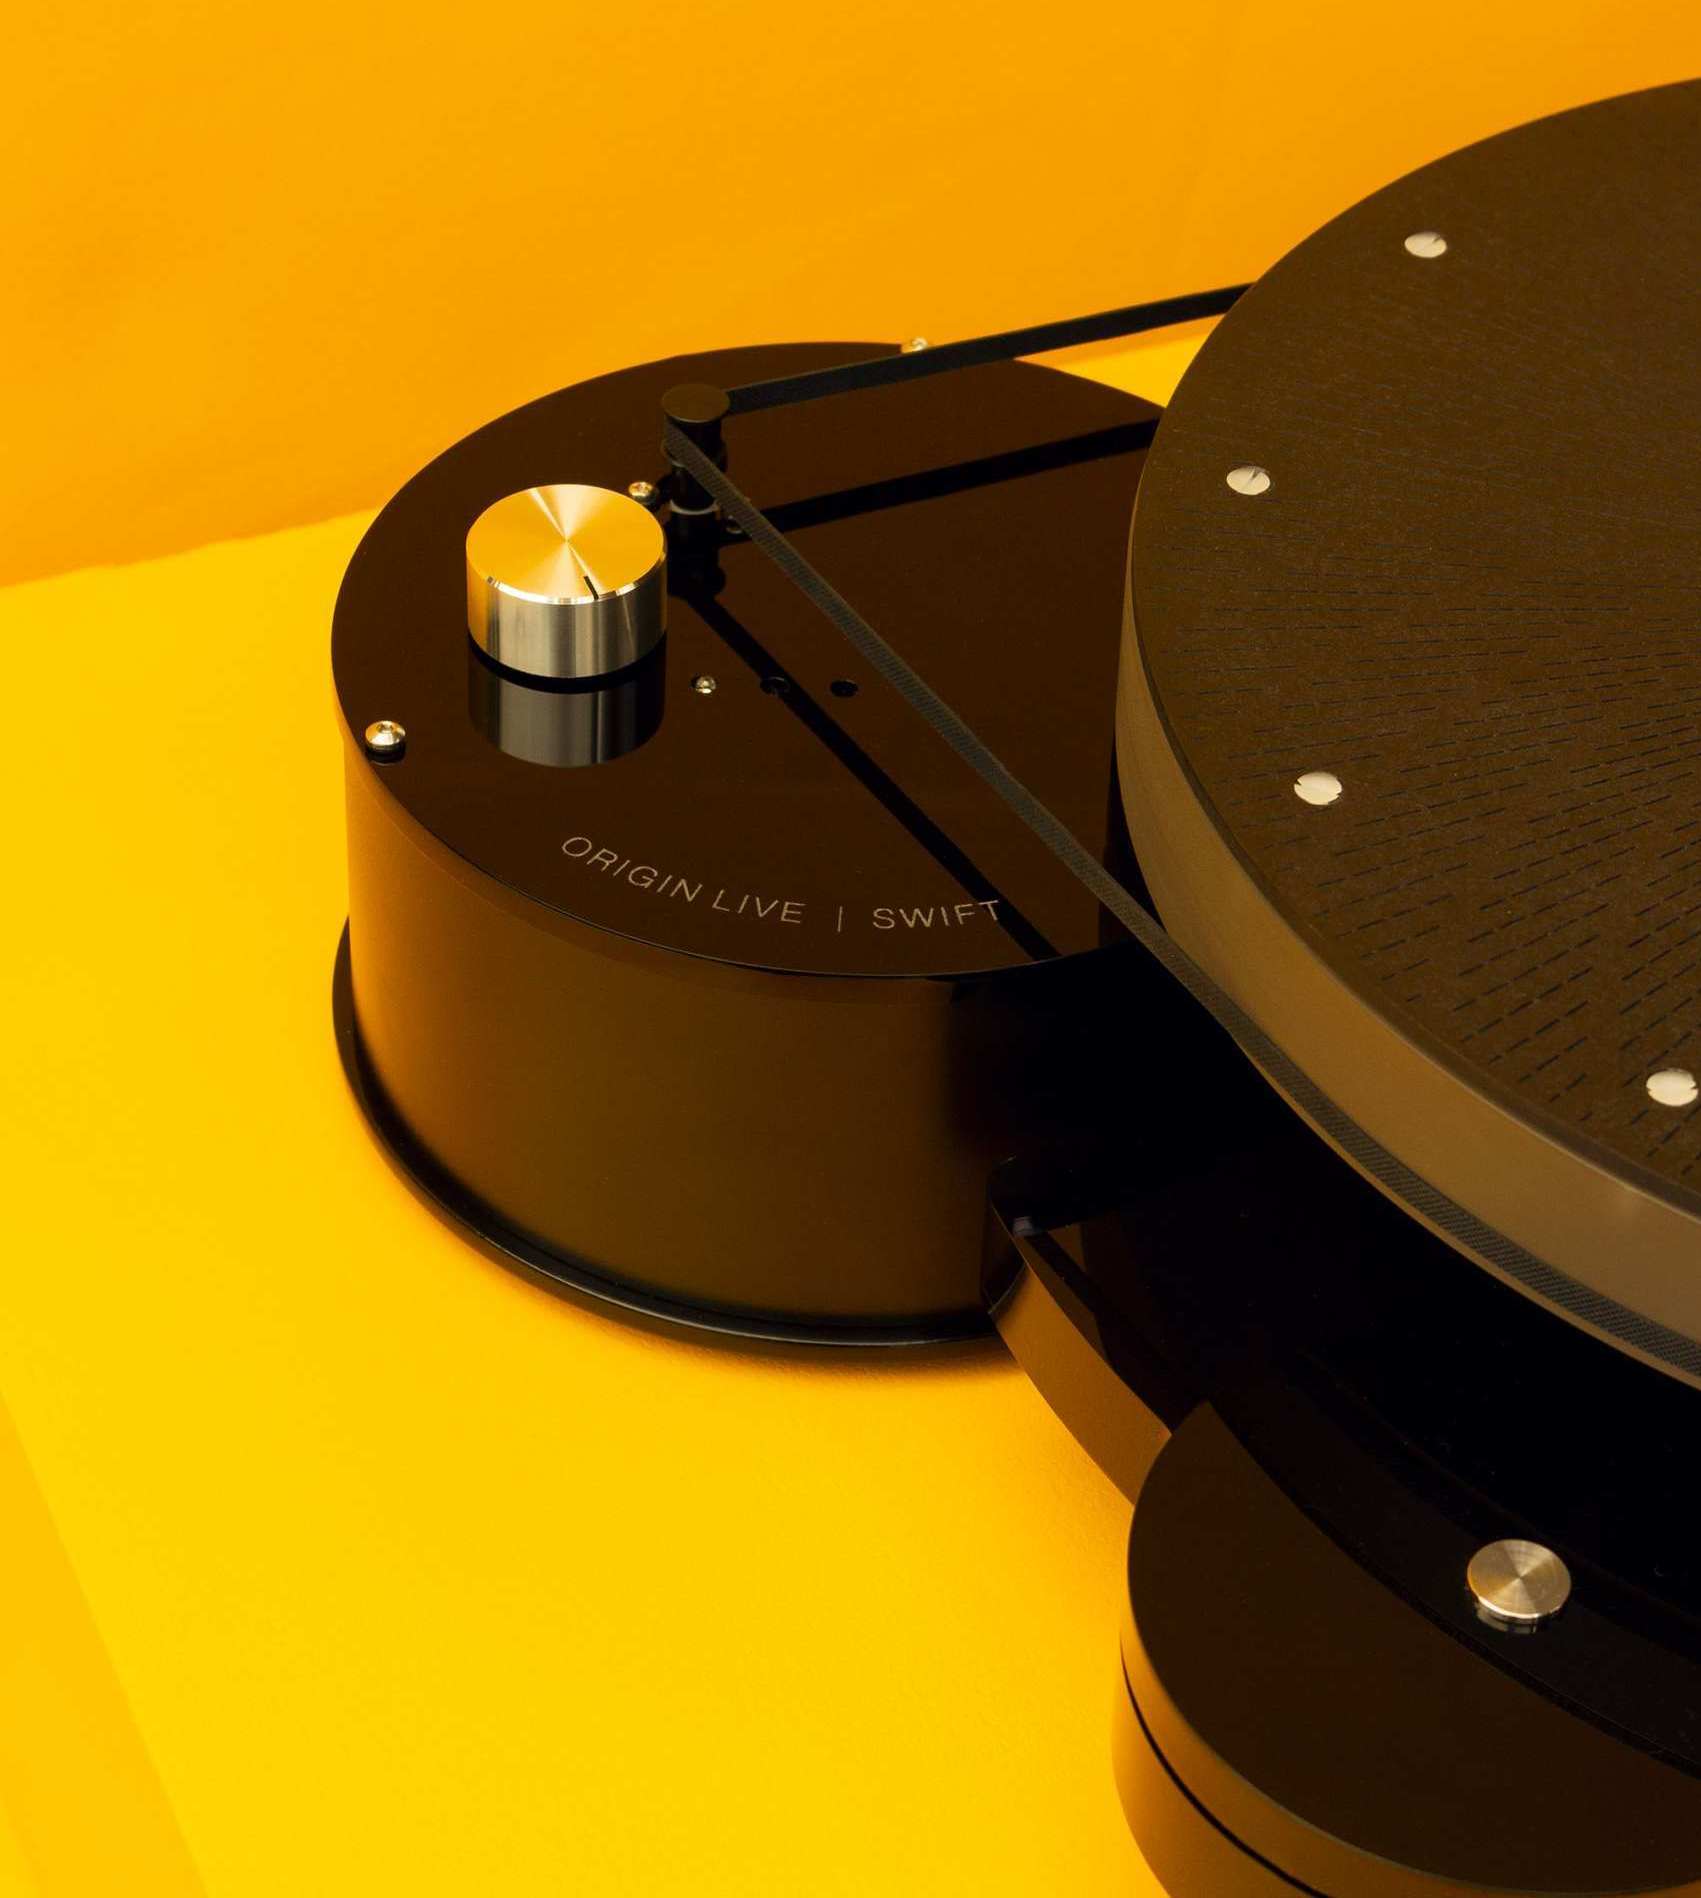 Swift Turntable what Hi-Fi? Which motor power supply super stable speed high performance hi-fi audiophile